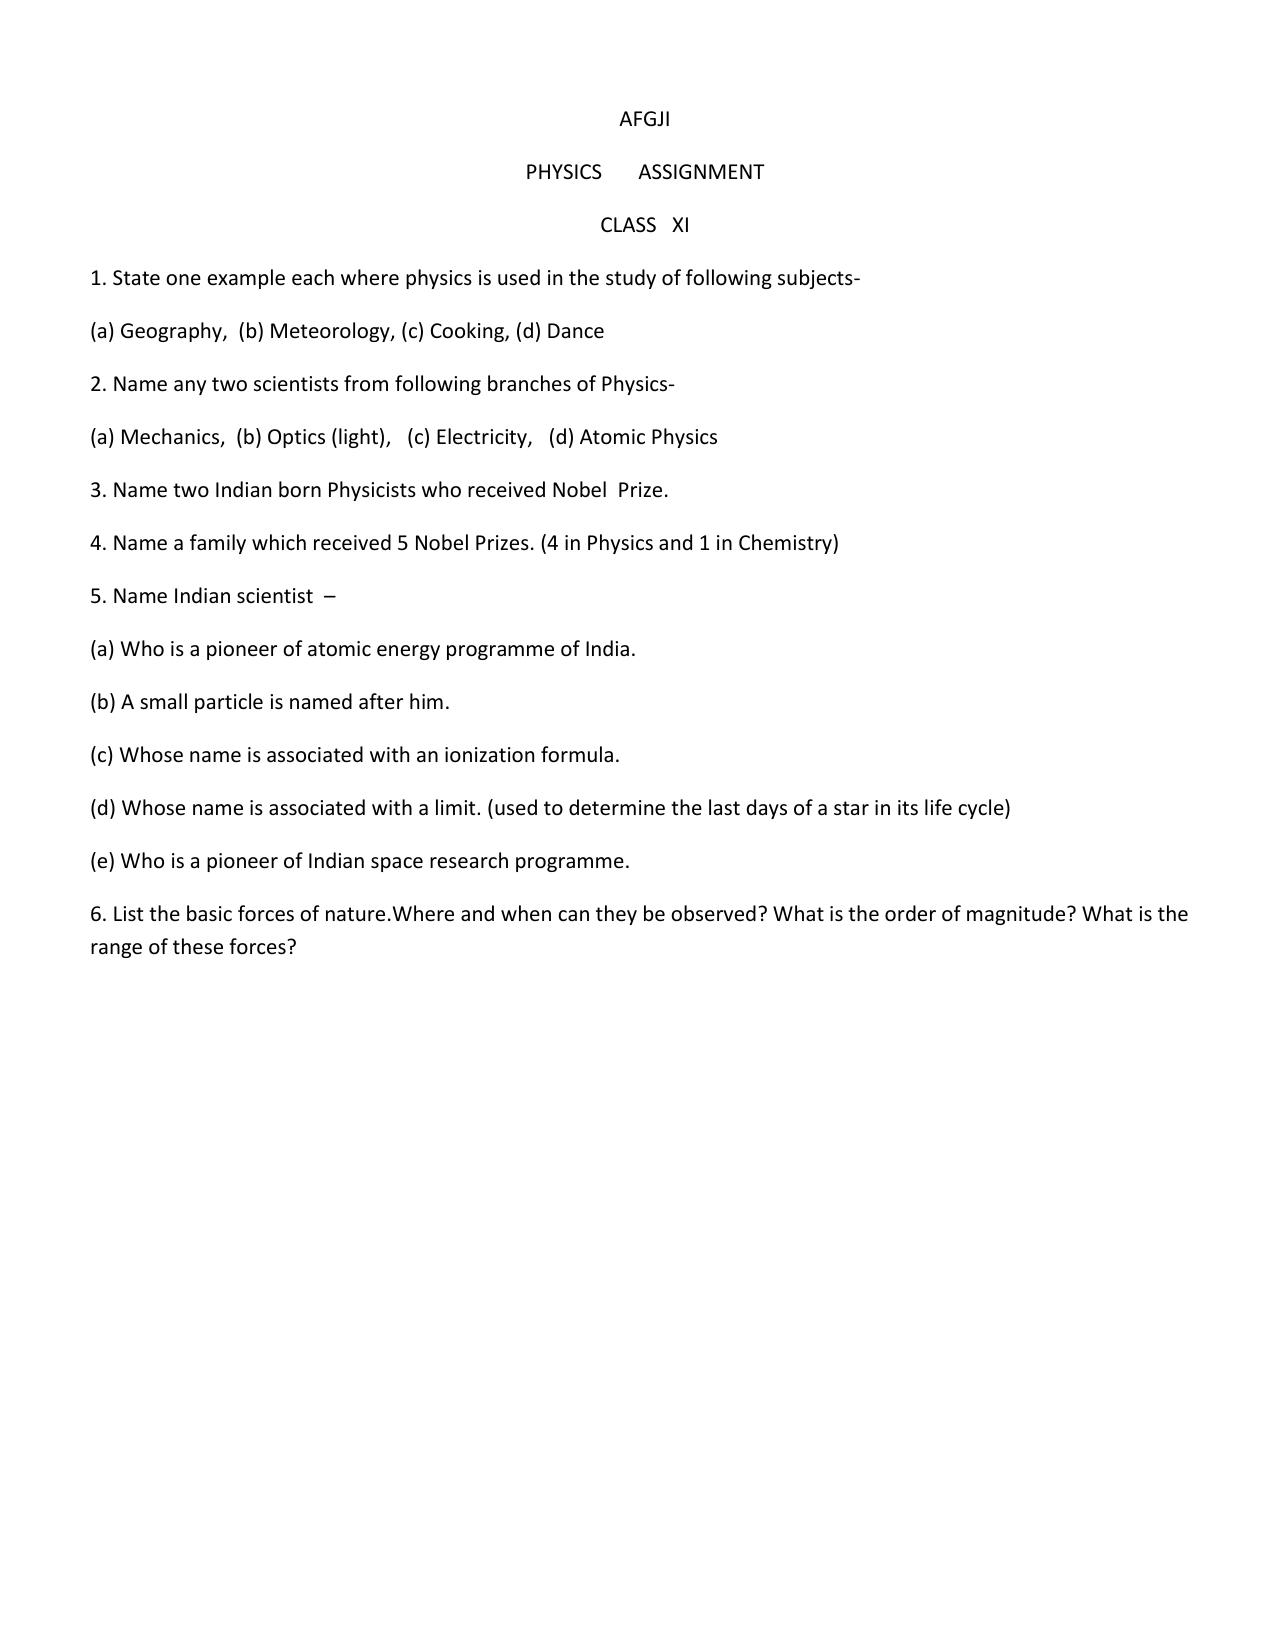 CBSE Worksheets for Class 11 Physics Assignment 2 - Page 1